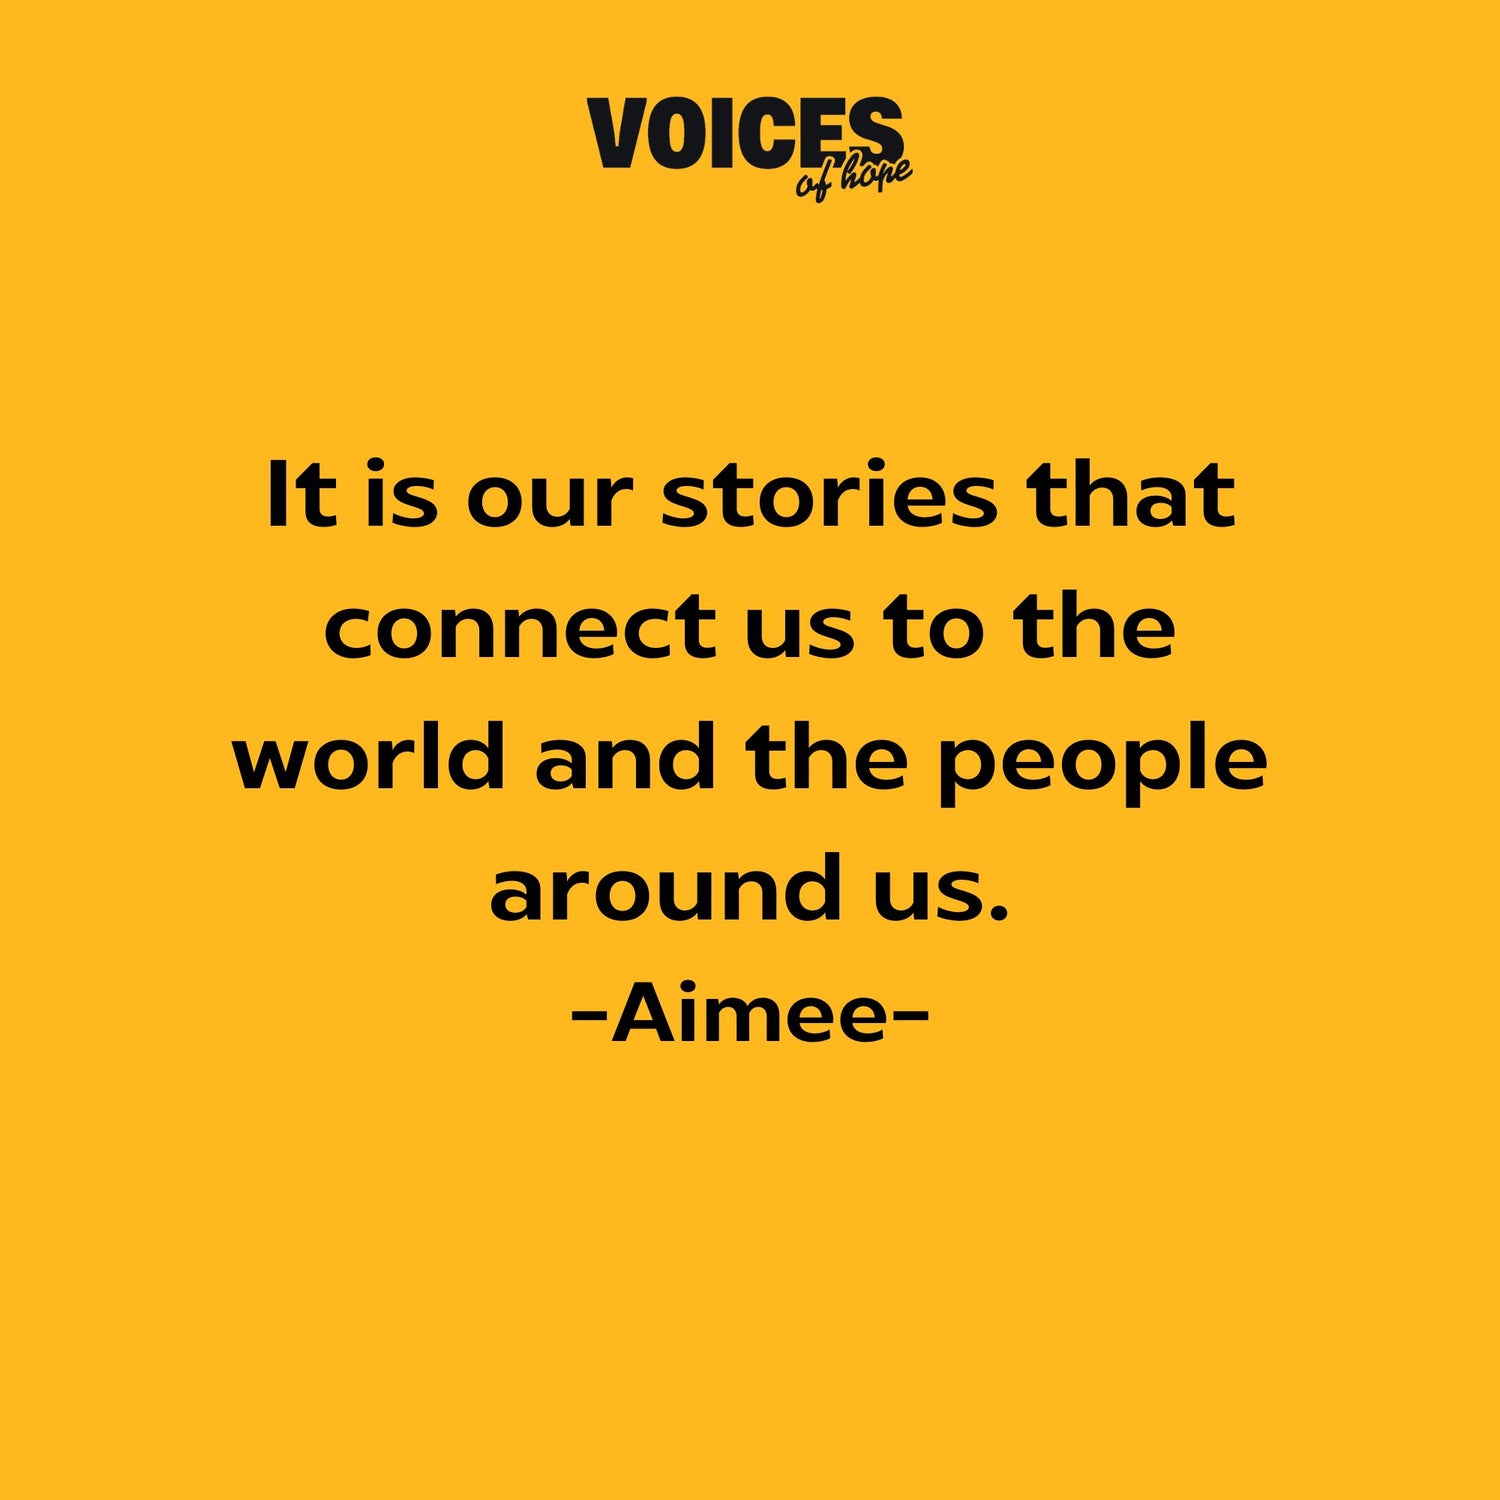 Yellow background with black writing that reads: "it is our stories that connect us to the world and the people around us. Aimee."